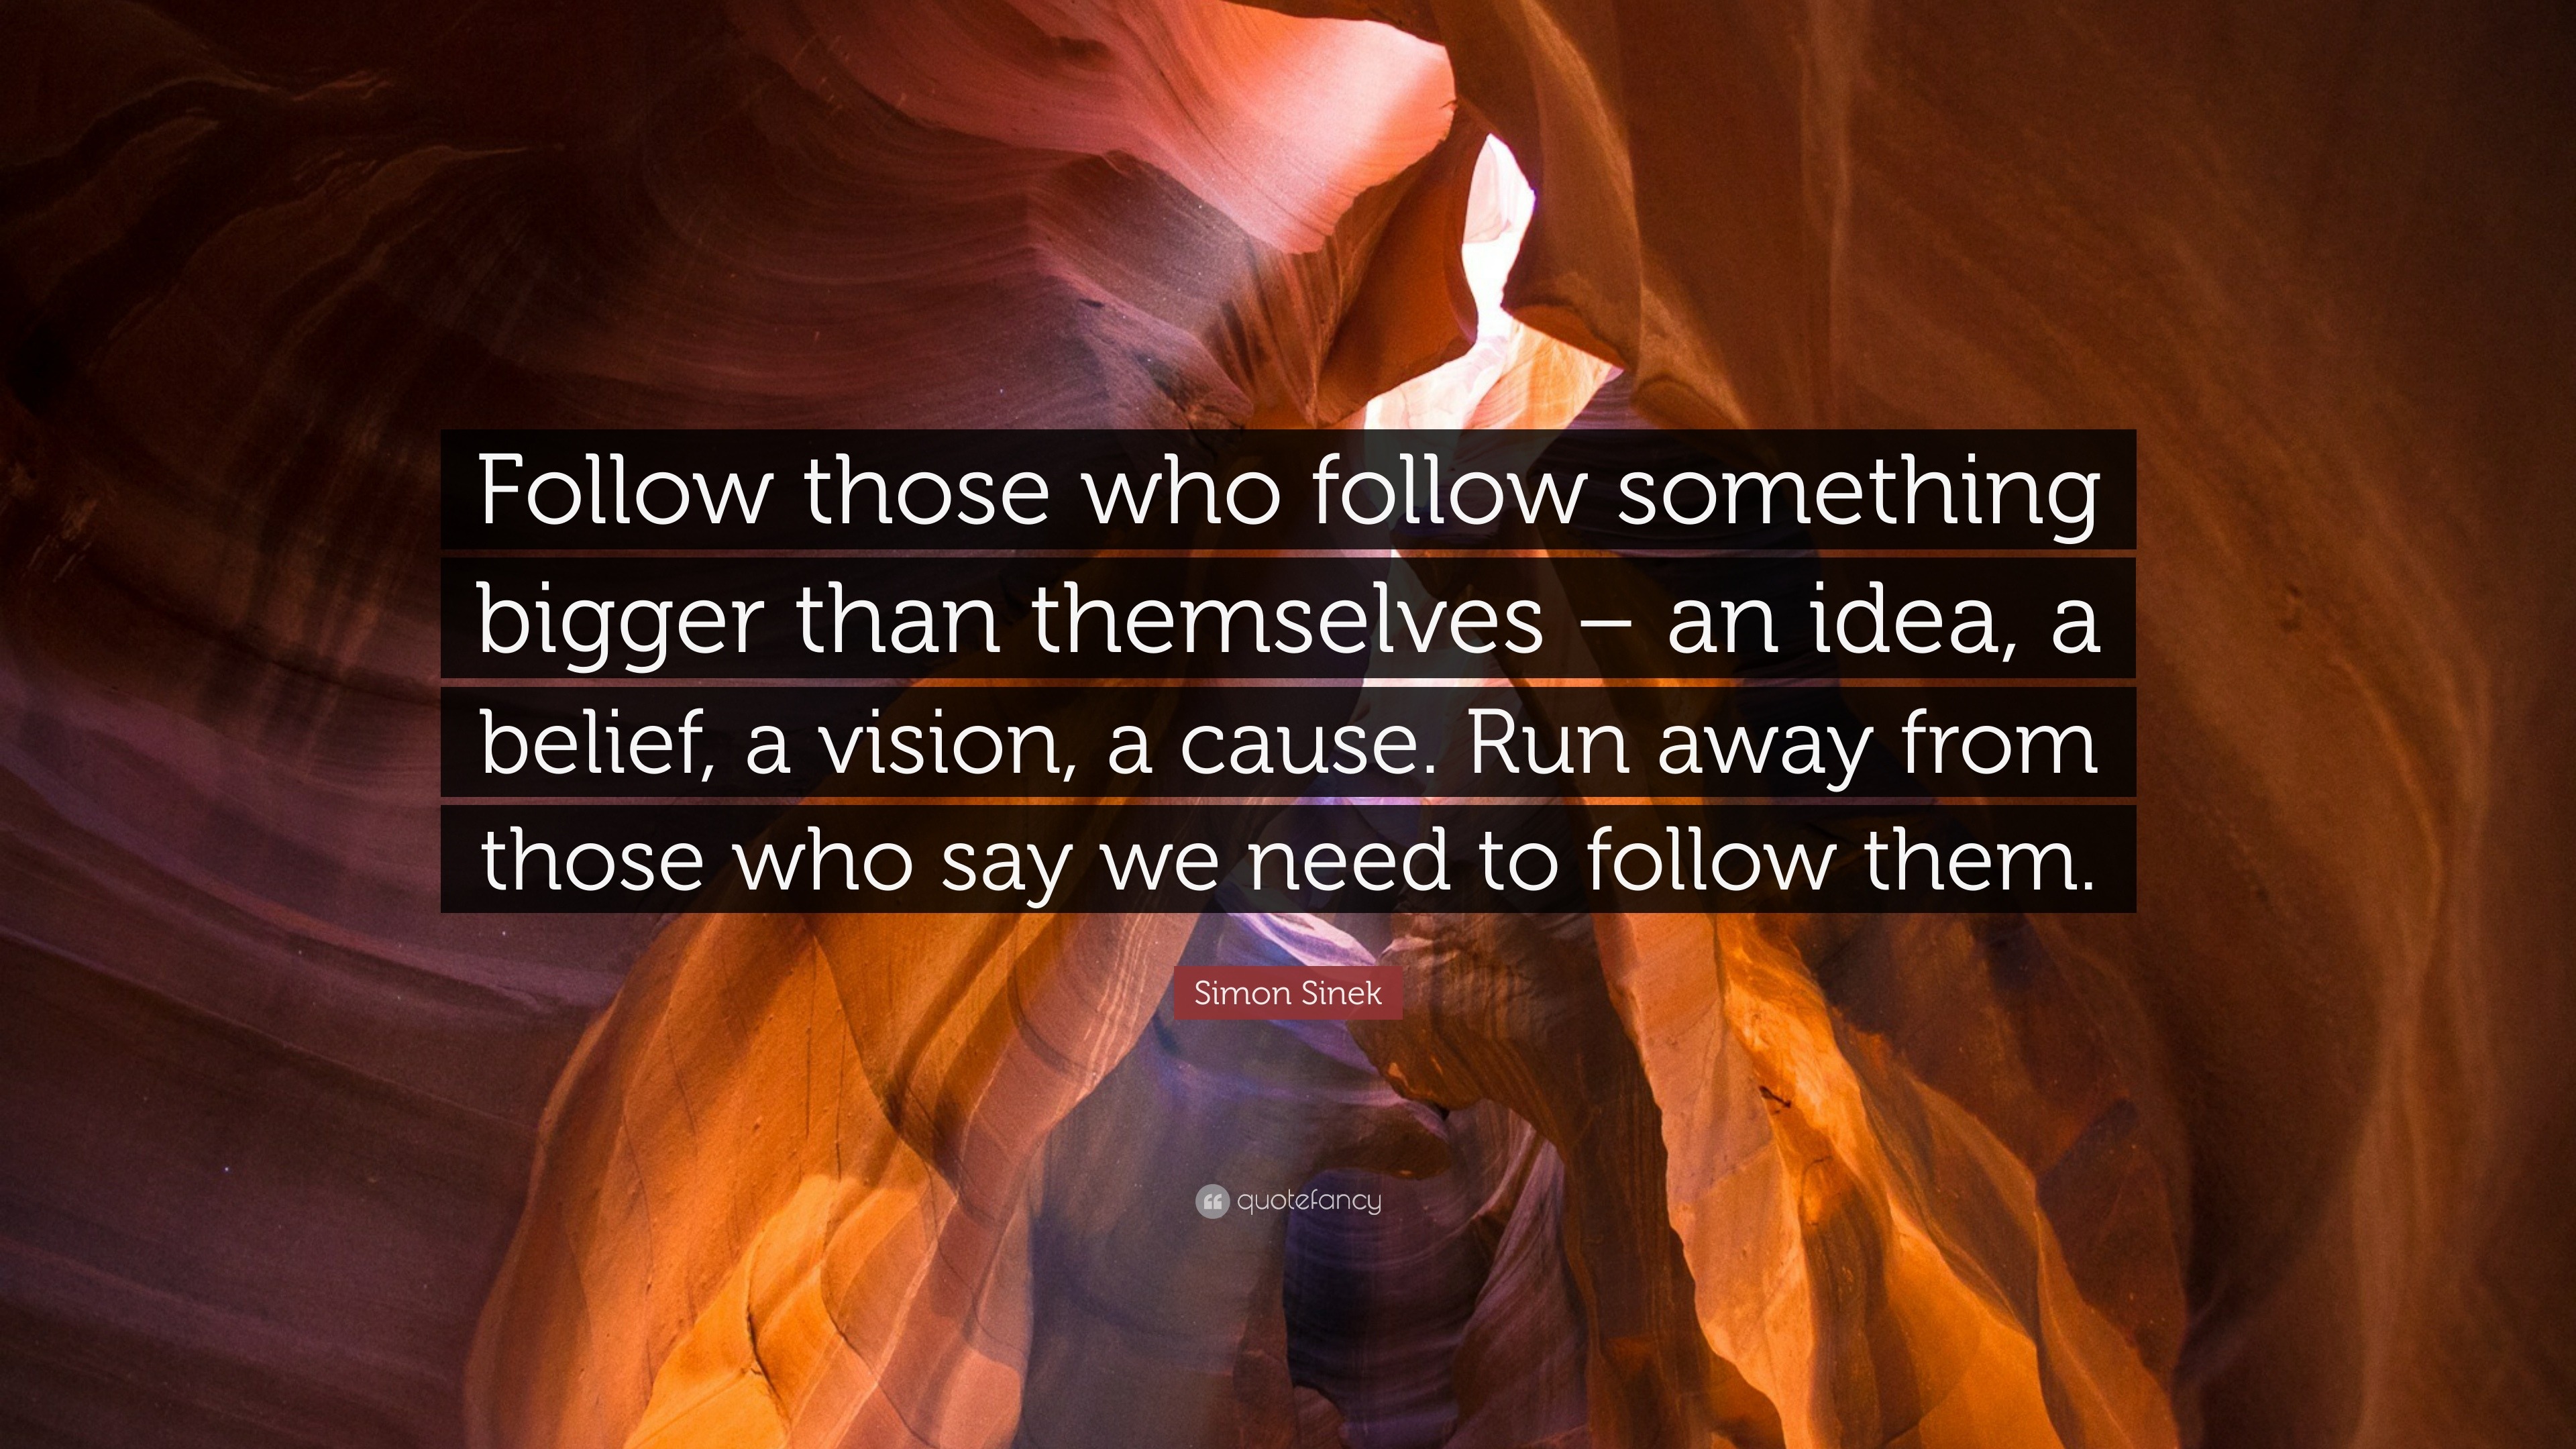 Simon Sinek Quote: “Follow those who follow something bigger than  themselves – an idea, a belief, a vision, a cause. Run away from those  who...”